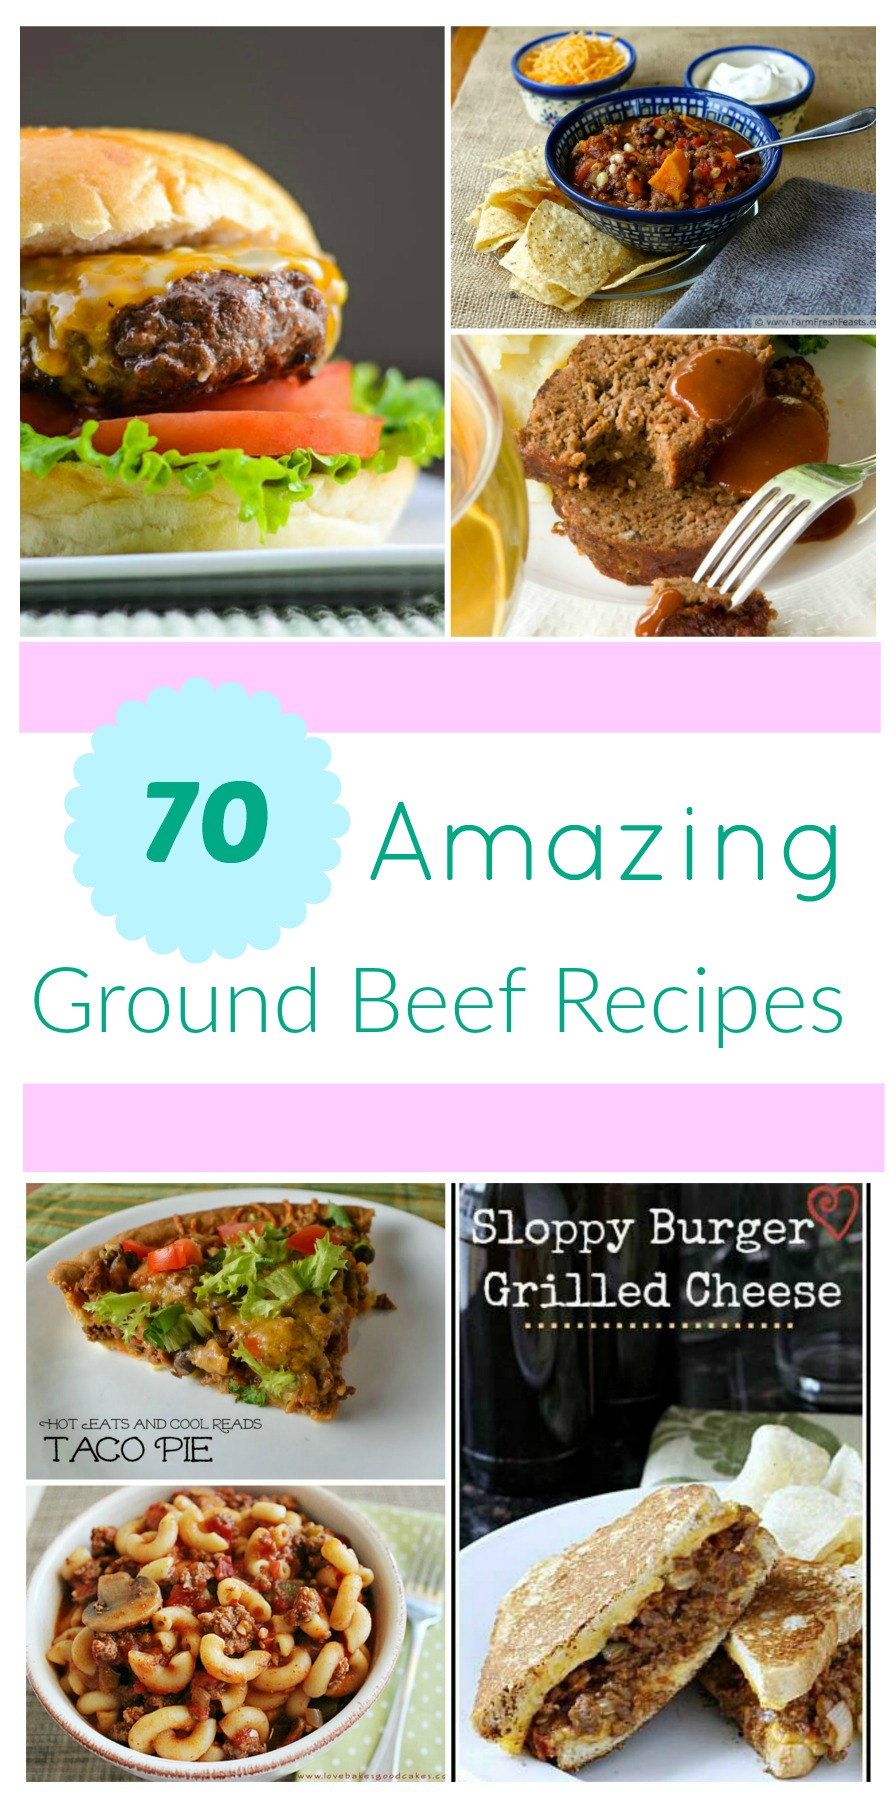 Looking for some quick ground beef recipes? Check out our Beef Ground Roundup, featuring 70 ground beef recipes, here!